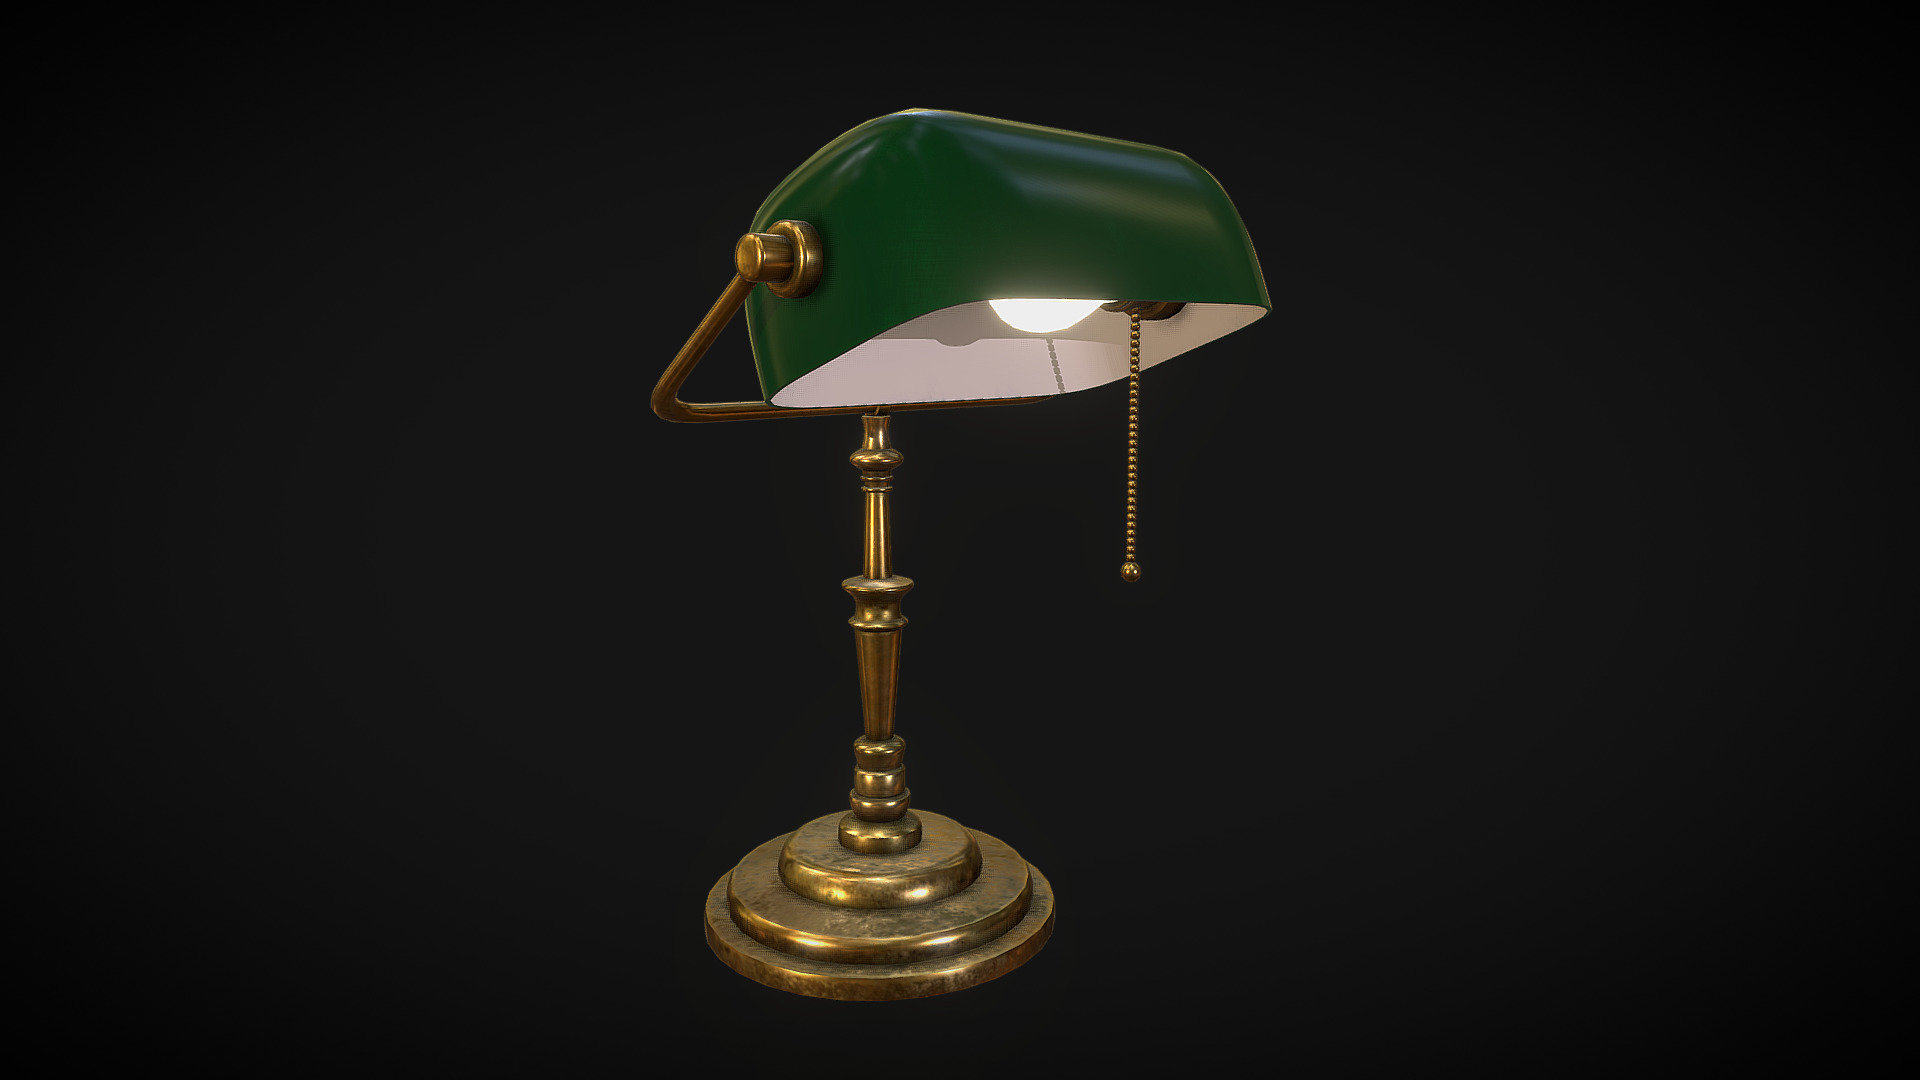 A lamp to be used in a personal project, a noir style detective desk 3d model